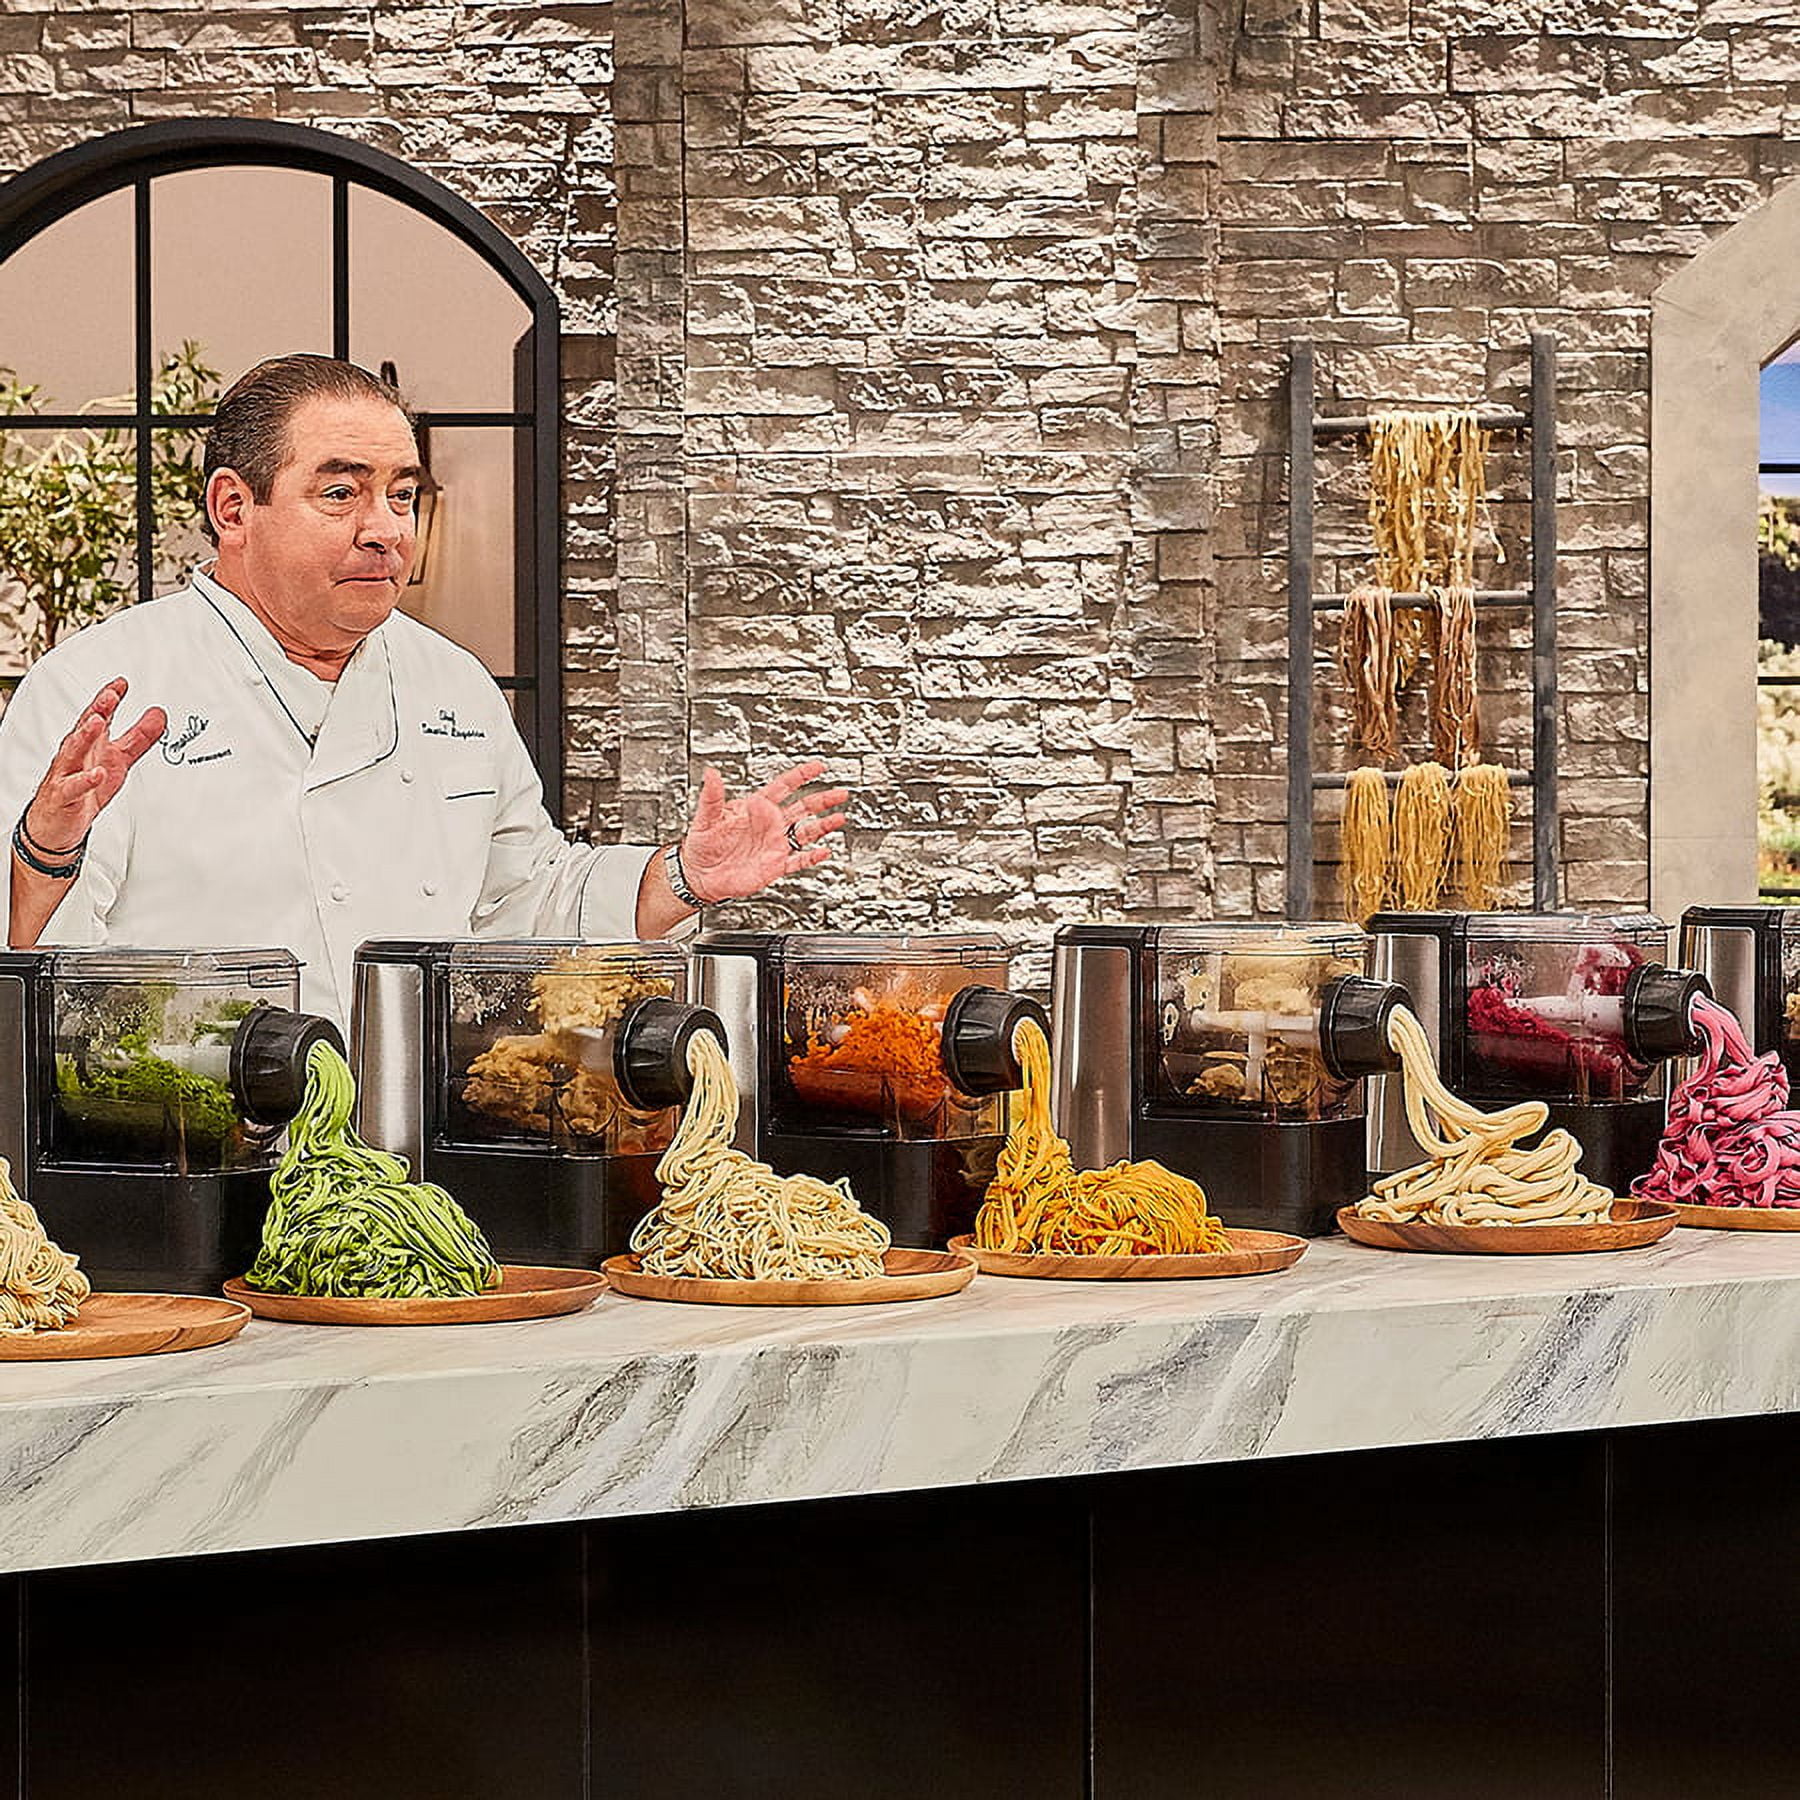 New Emeril Lagasse Pasta & Beyond, Automatic Pasta and Noodle